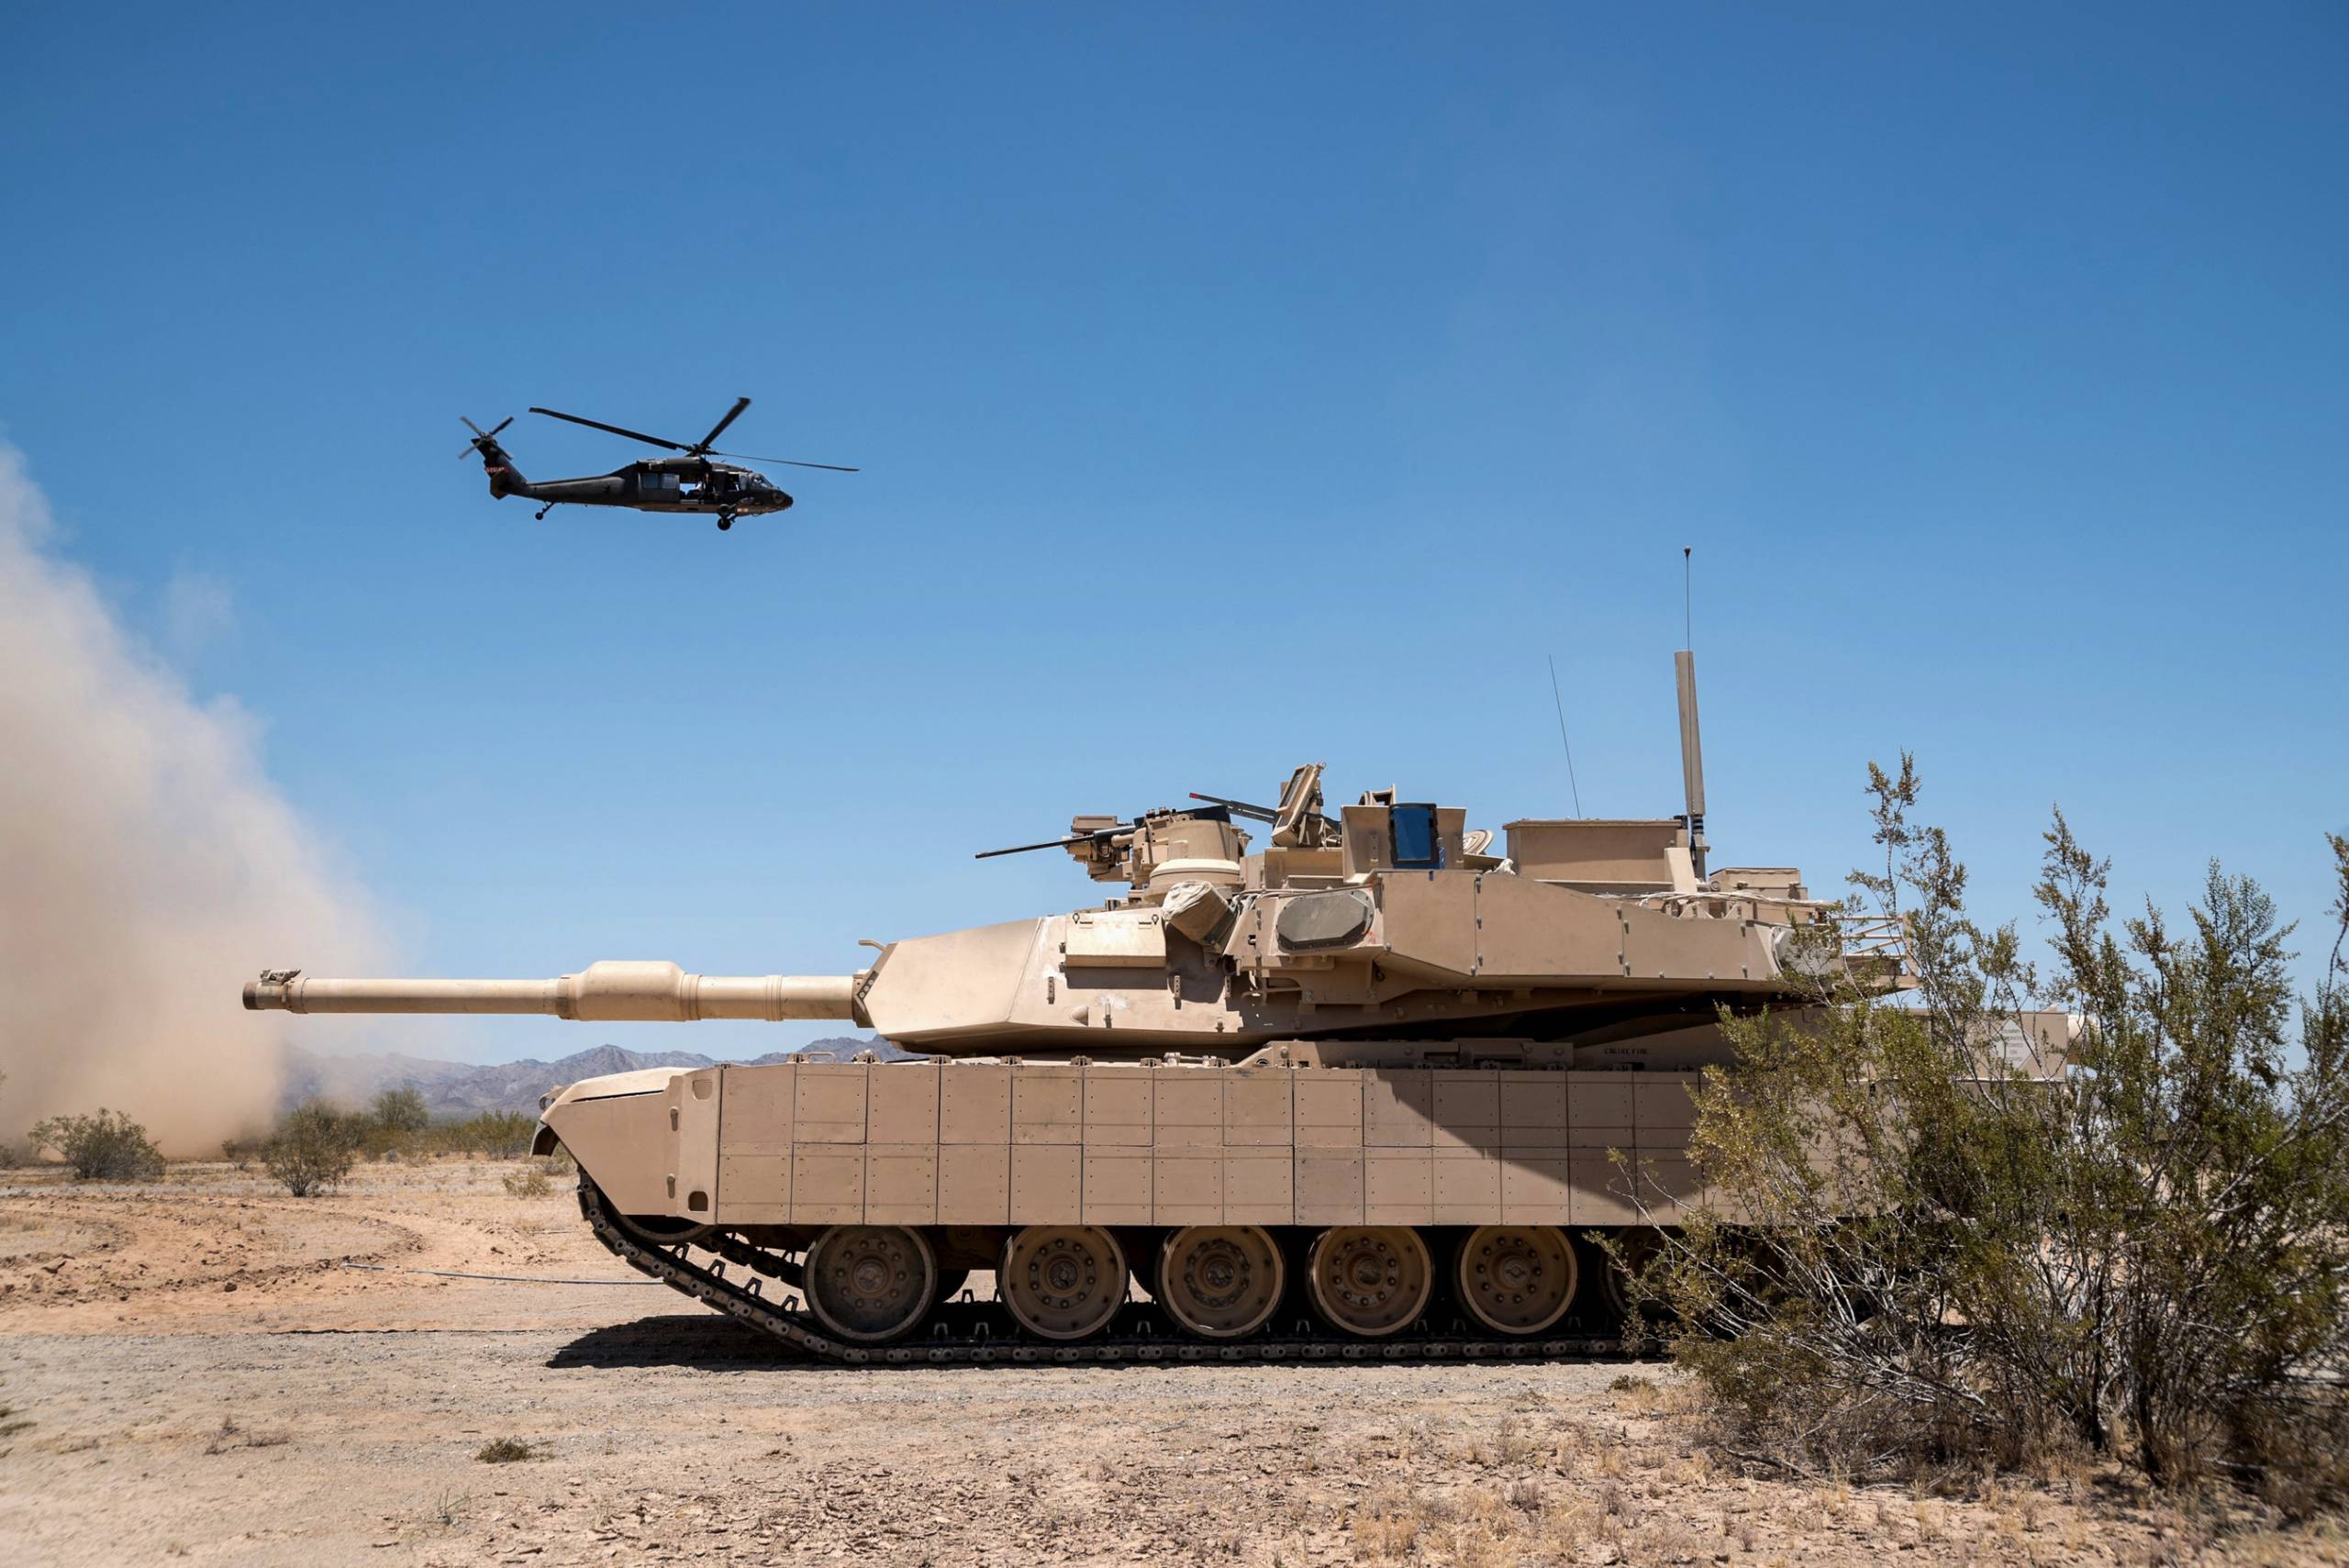 General Dynamics Land Systems was awarded a competitive award worth up to $280,112,700 to procure Trophy Ready Kits as an Active Protection System (APS) for Abrams main battle tanks.